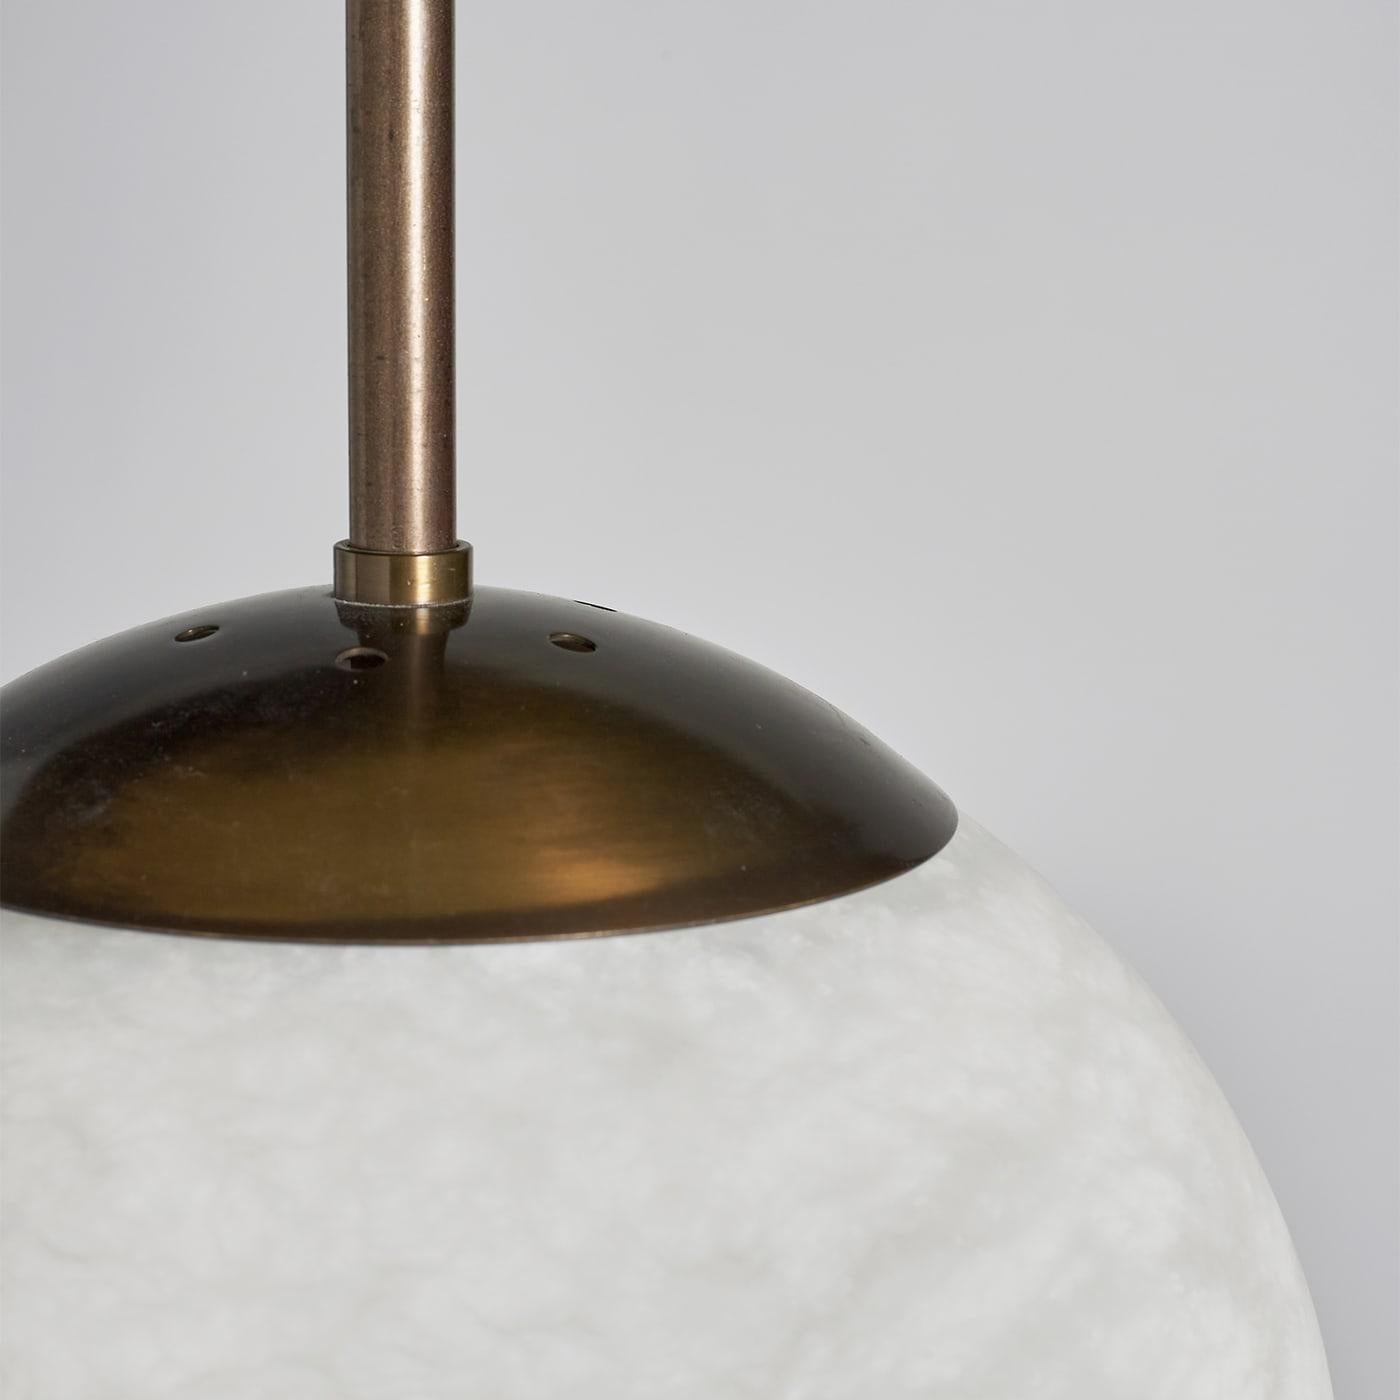 Harmonious geometric volumes surprisingly reveal in this pendant lamp a poetic inspiration evoking the magic of full-moon nights. Fitted to an elegant and streamlined bronzed metal structure, the lampshade consists of a precious alabaster globe